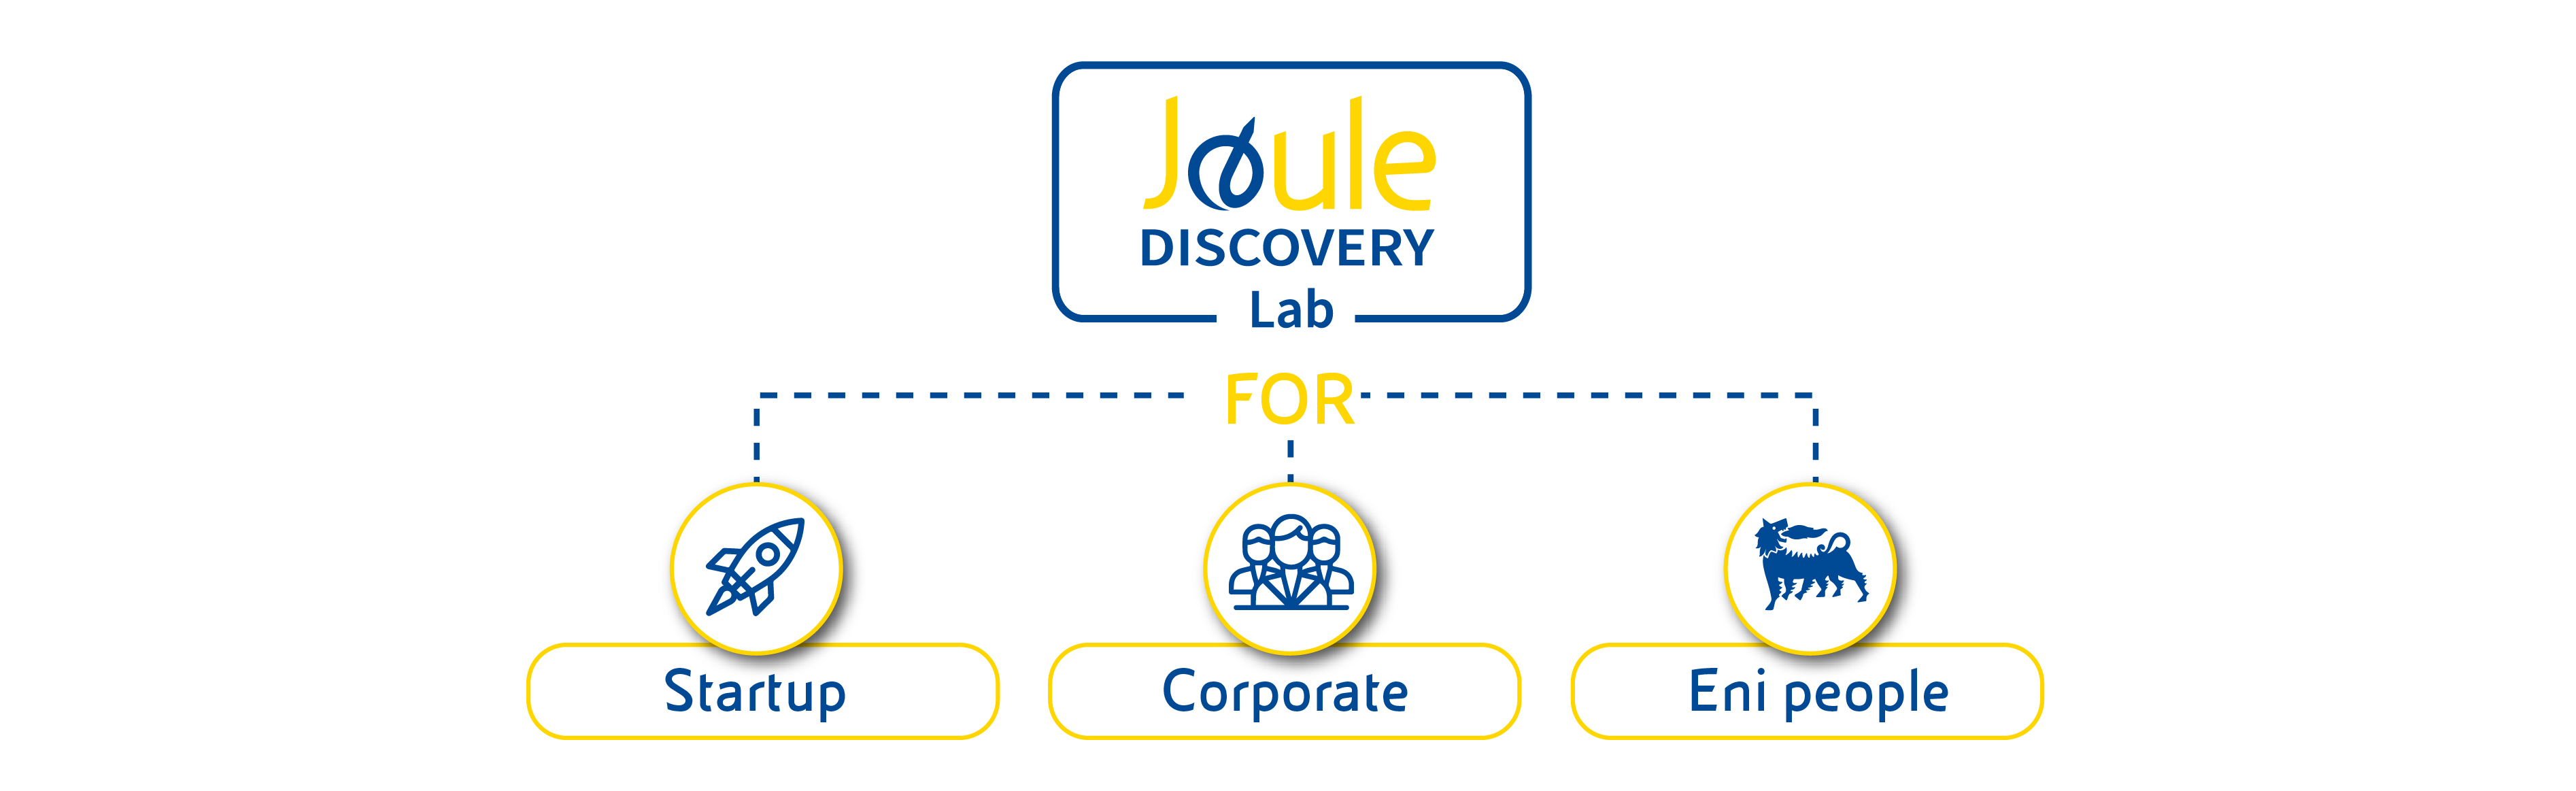 infografica-joule-discovery-lab